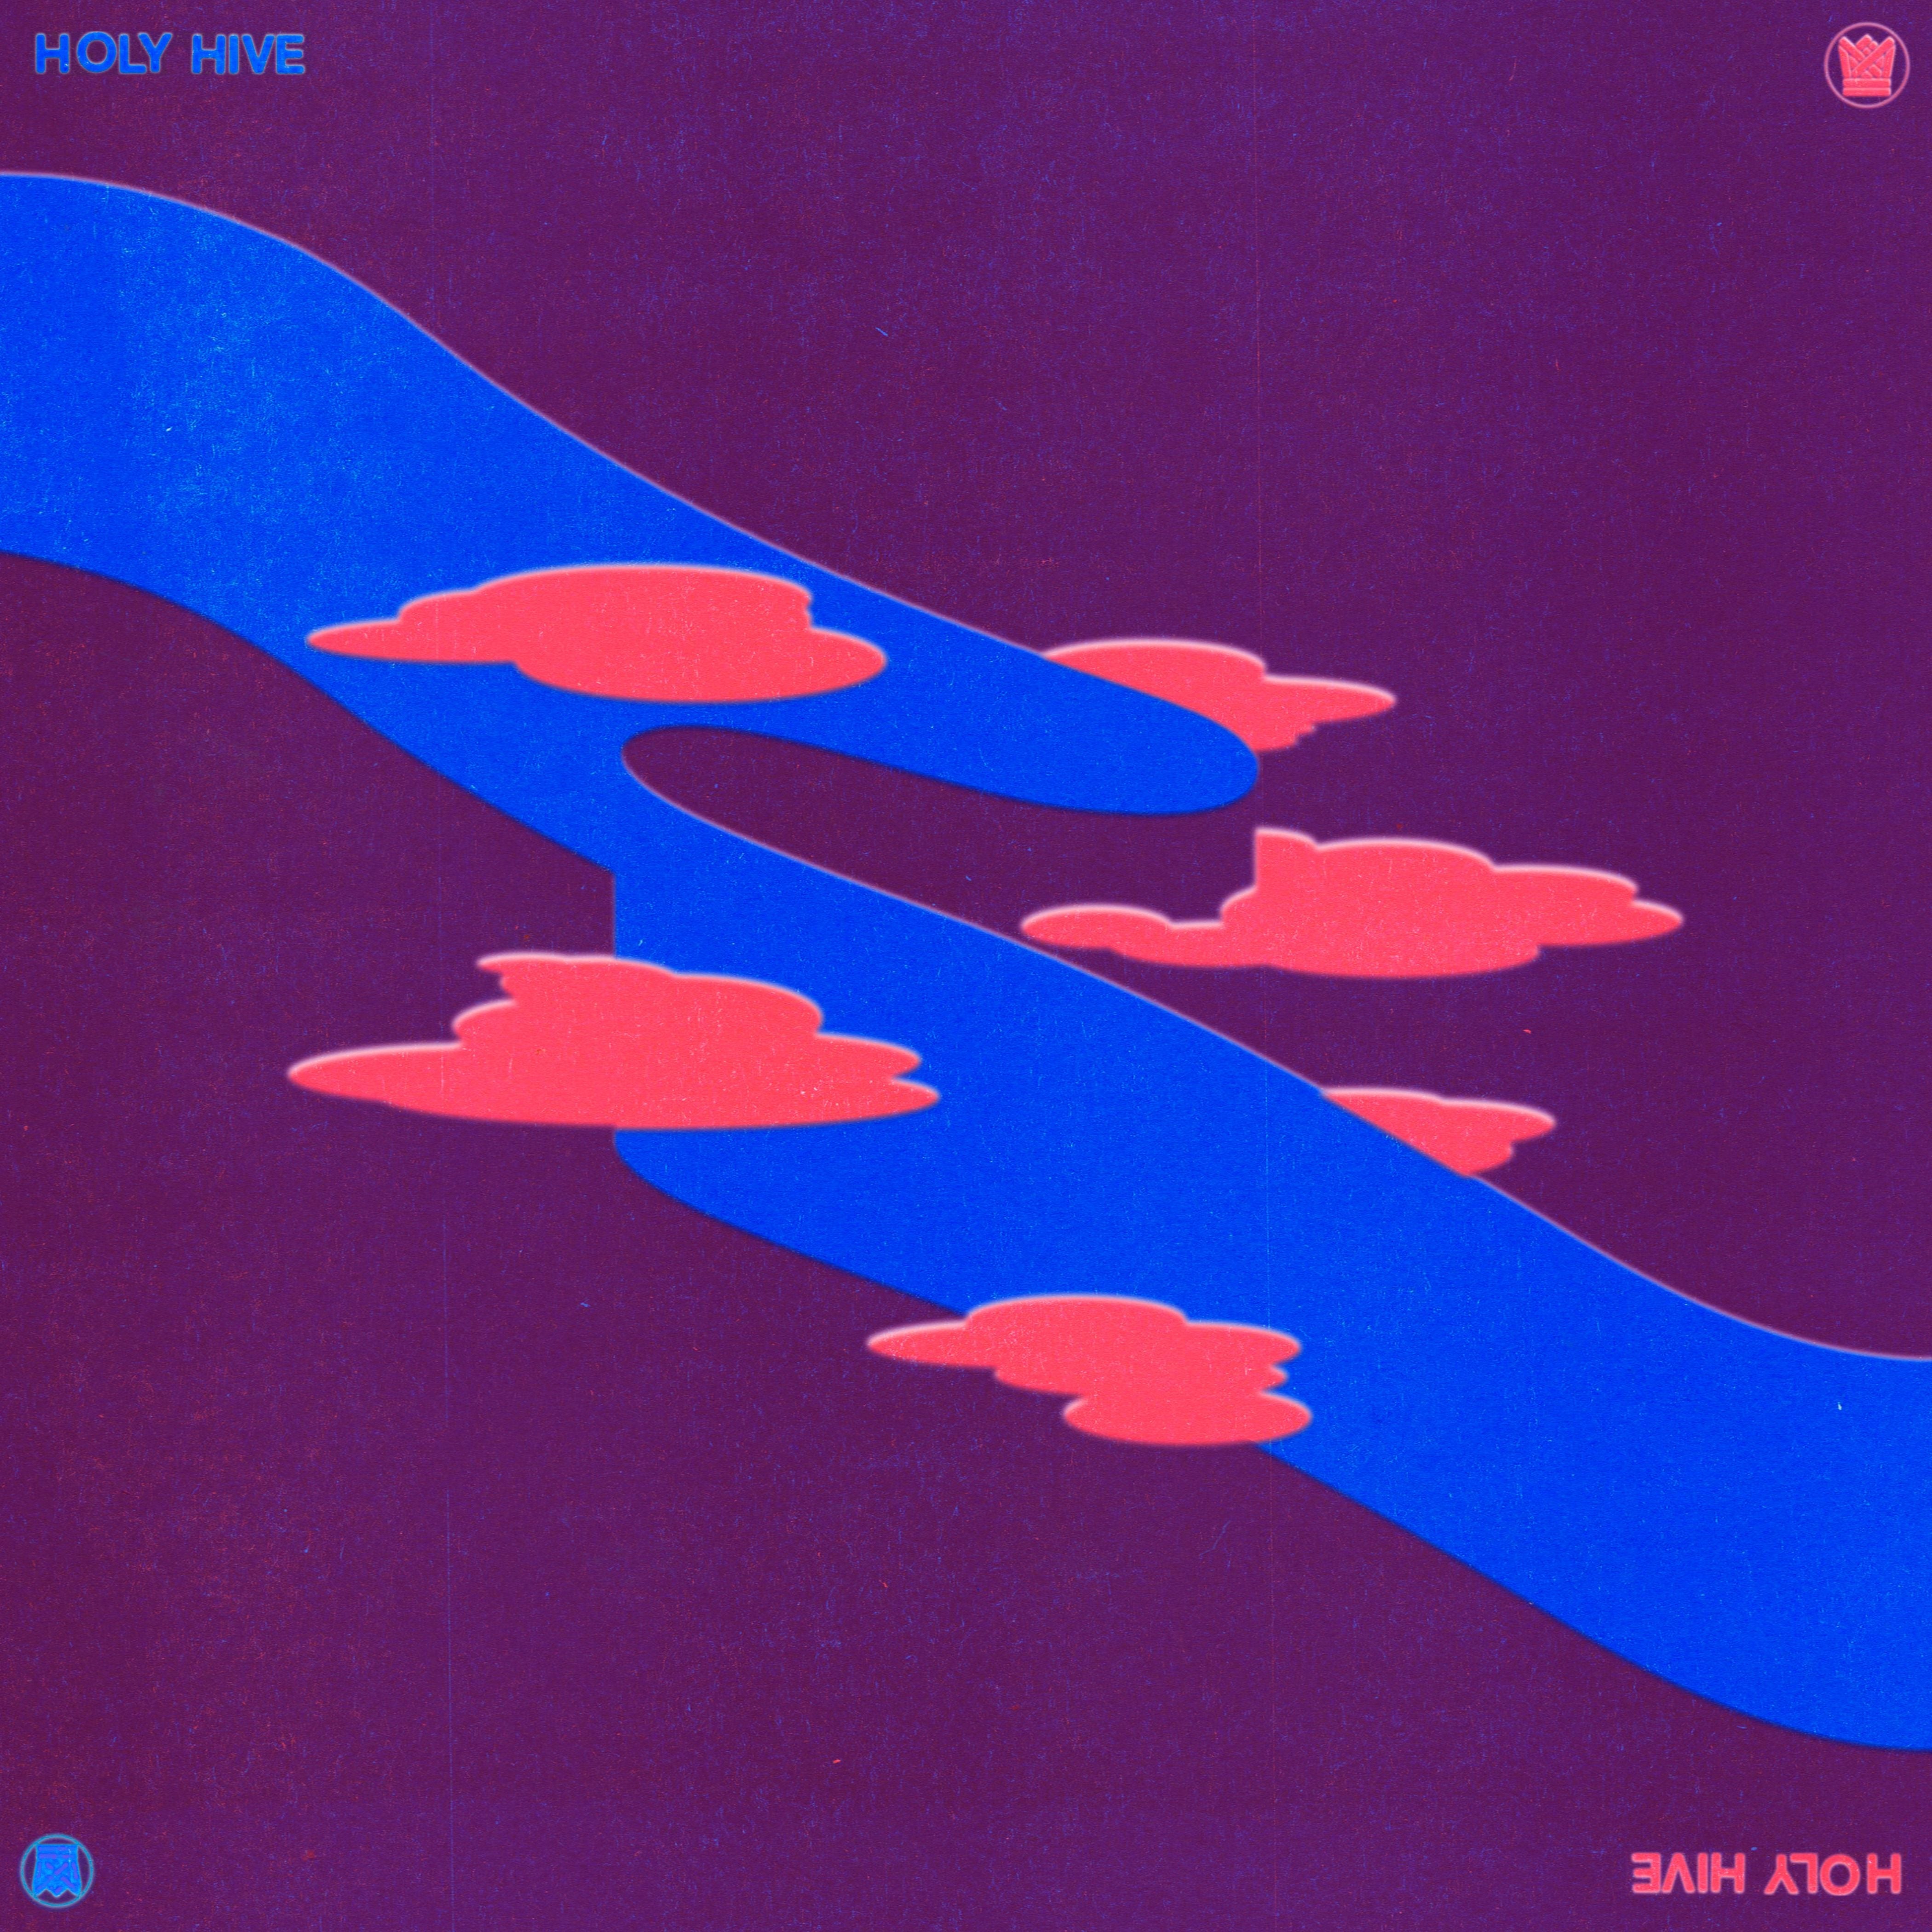 [DAMAGED] Holy Hive - Holy Hive [Plaid Room Records Exclusive Solid Pink Vinyl]